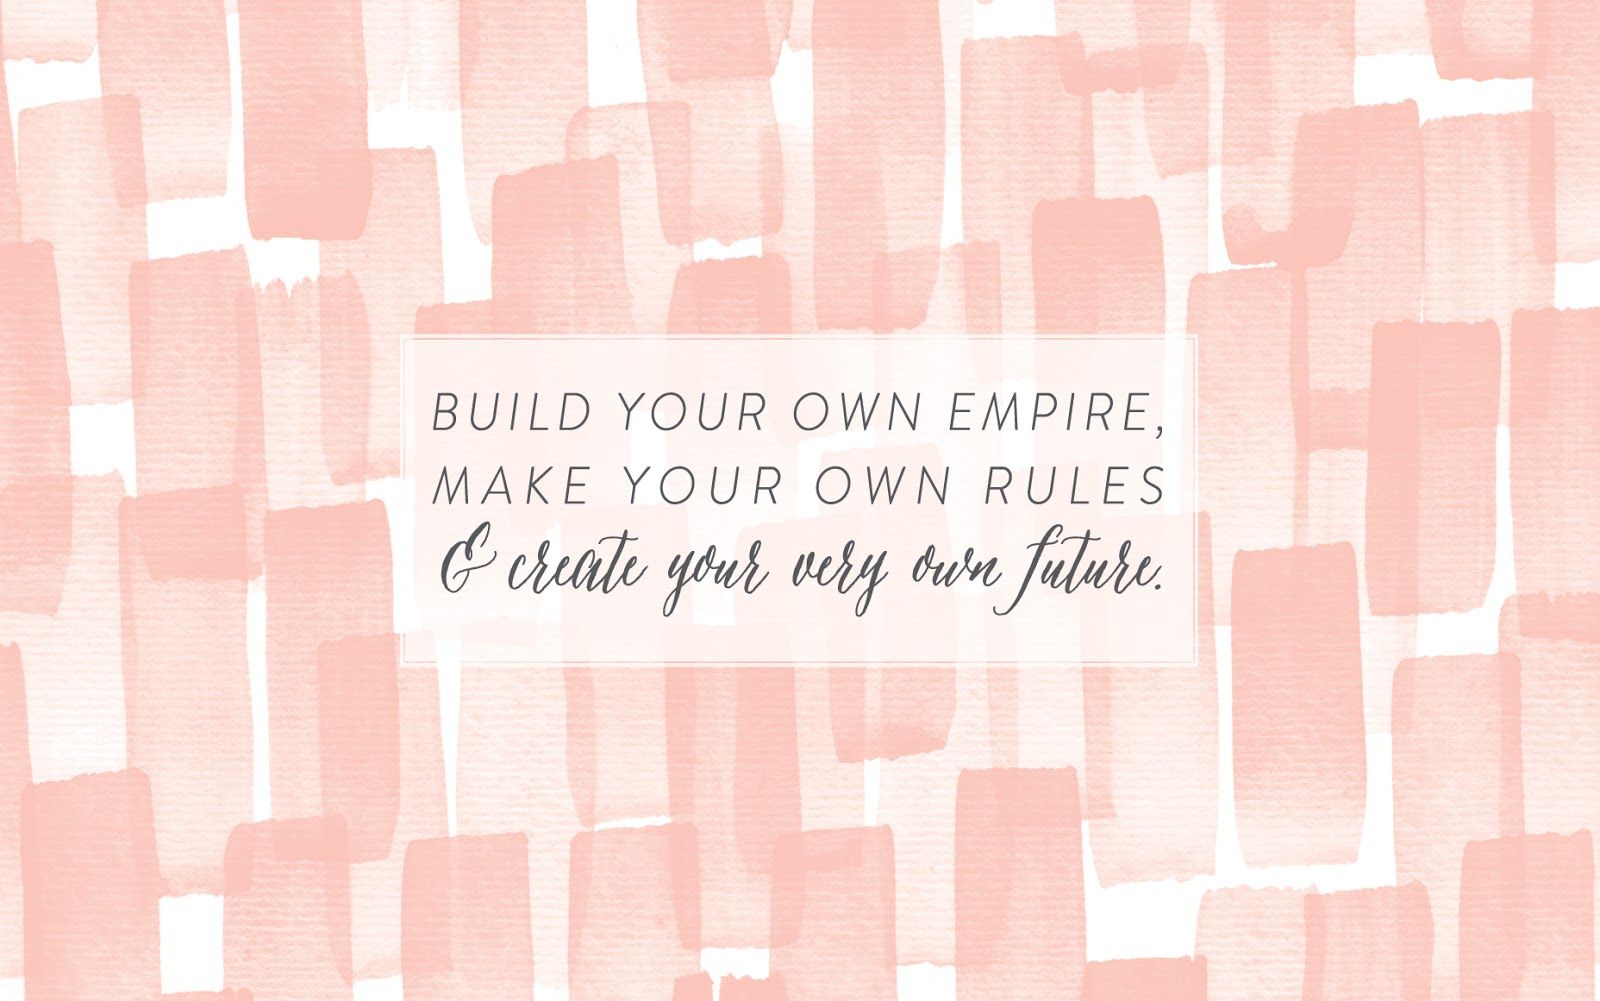 Build your own empire